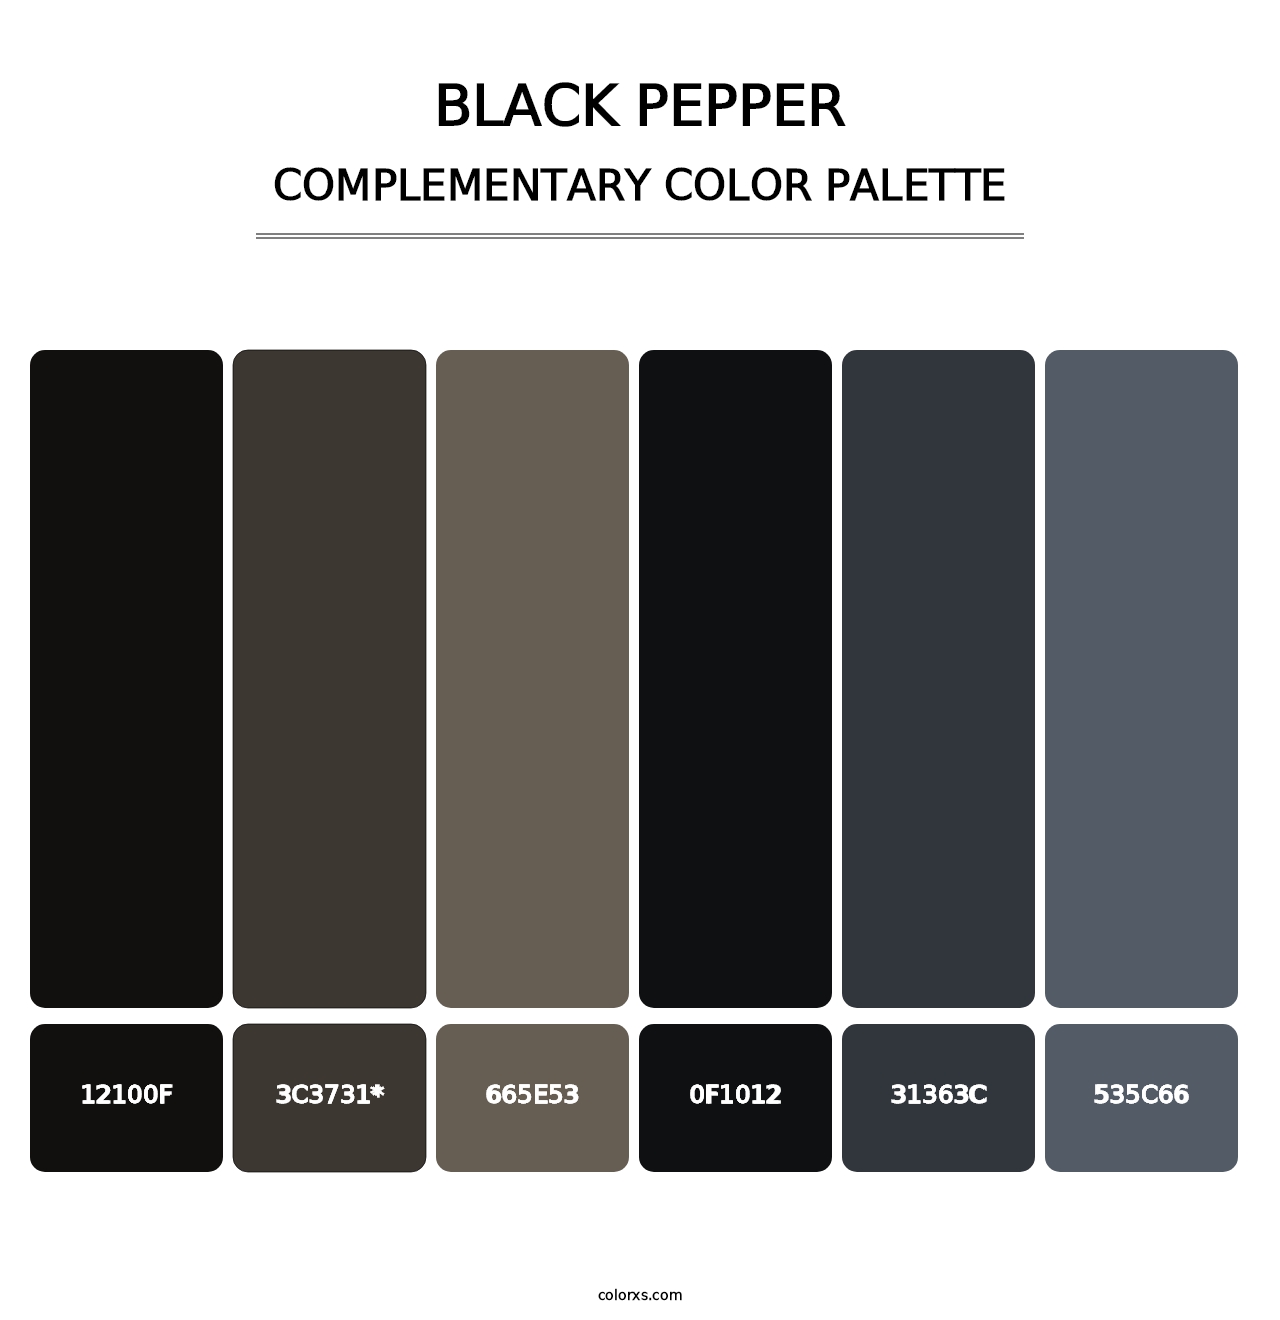 Black Pepper - Complementary Color Palette